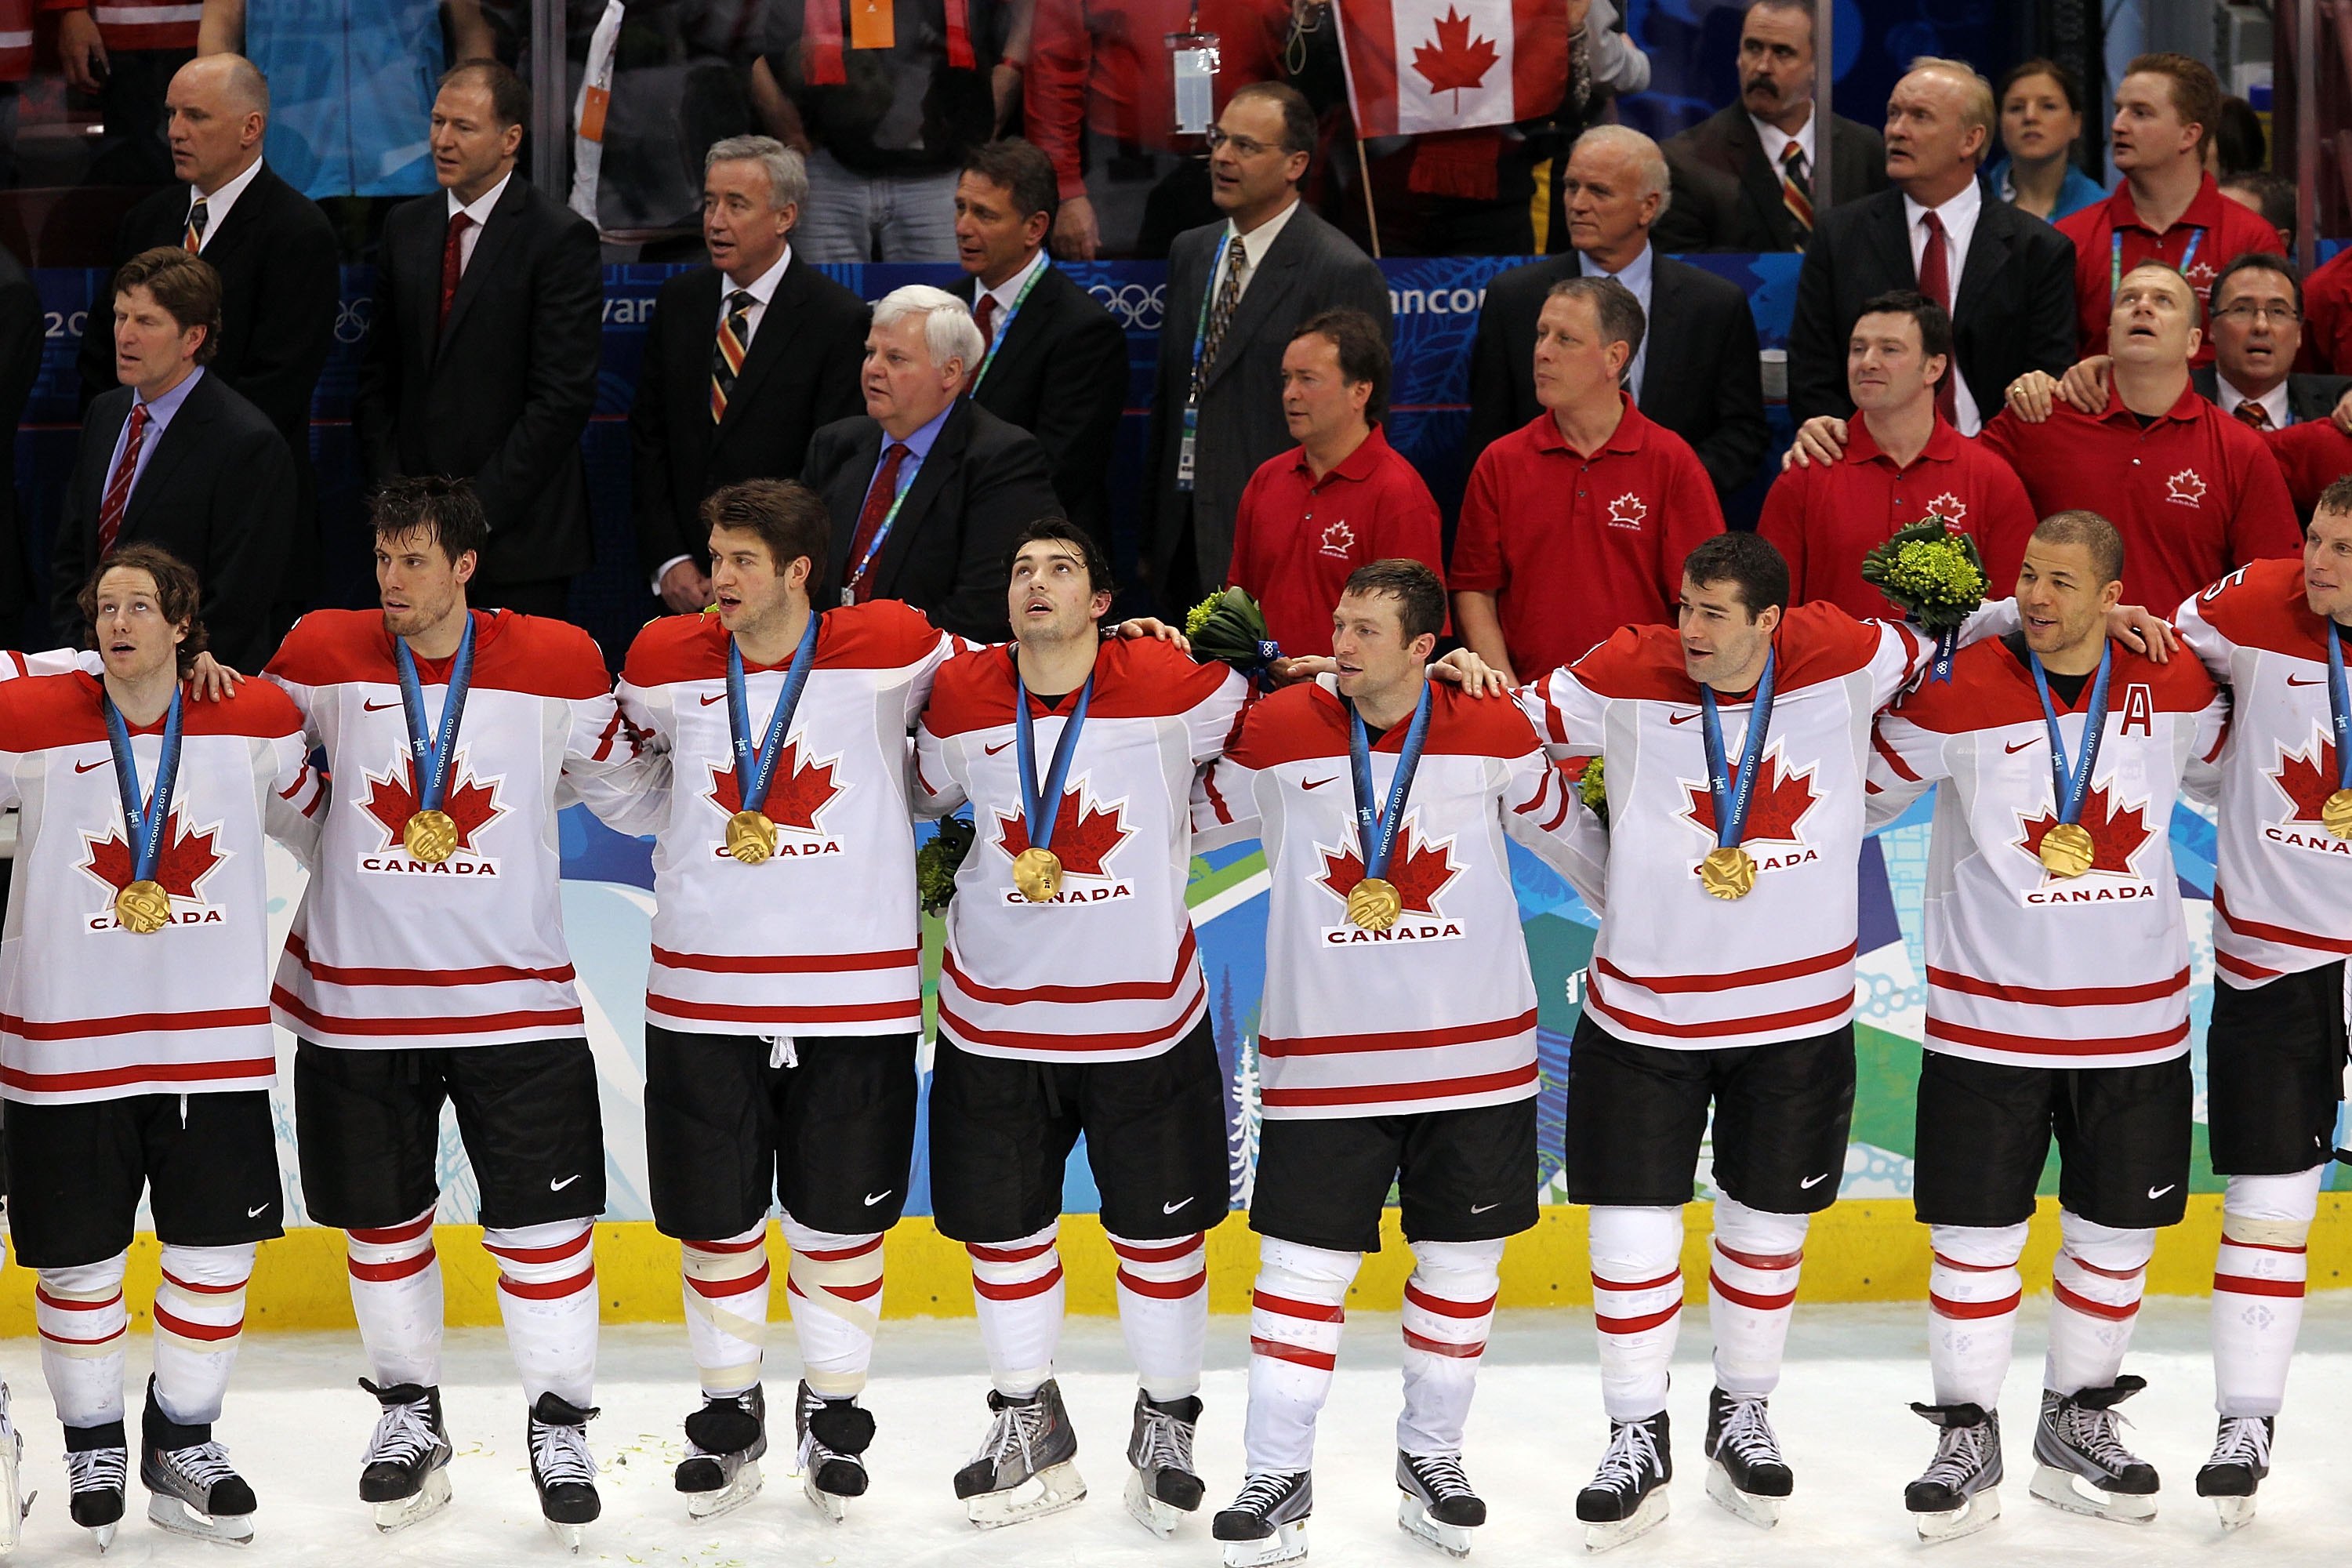 VANCOUVER, BC - FEBRUARY 28:  (L-R) Duncan Smith #2, Shea Weber #6, Brent Seabrook #7, Drew Doughty #8, Brenden Morrow #10, Patrick Marleau #11, Jarome Iginla #12 and Dany Heatley #15 of Canada stand together during the playing of the Canadian National An